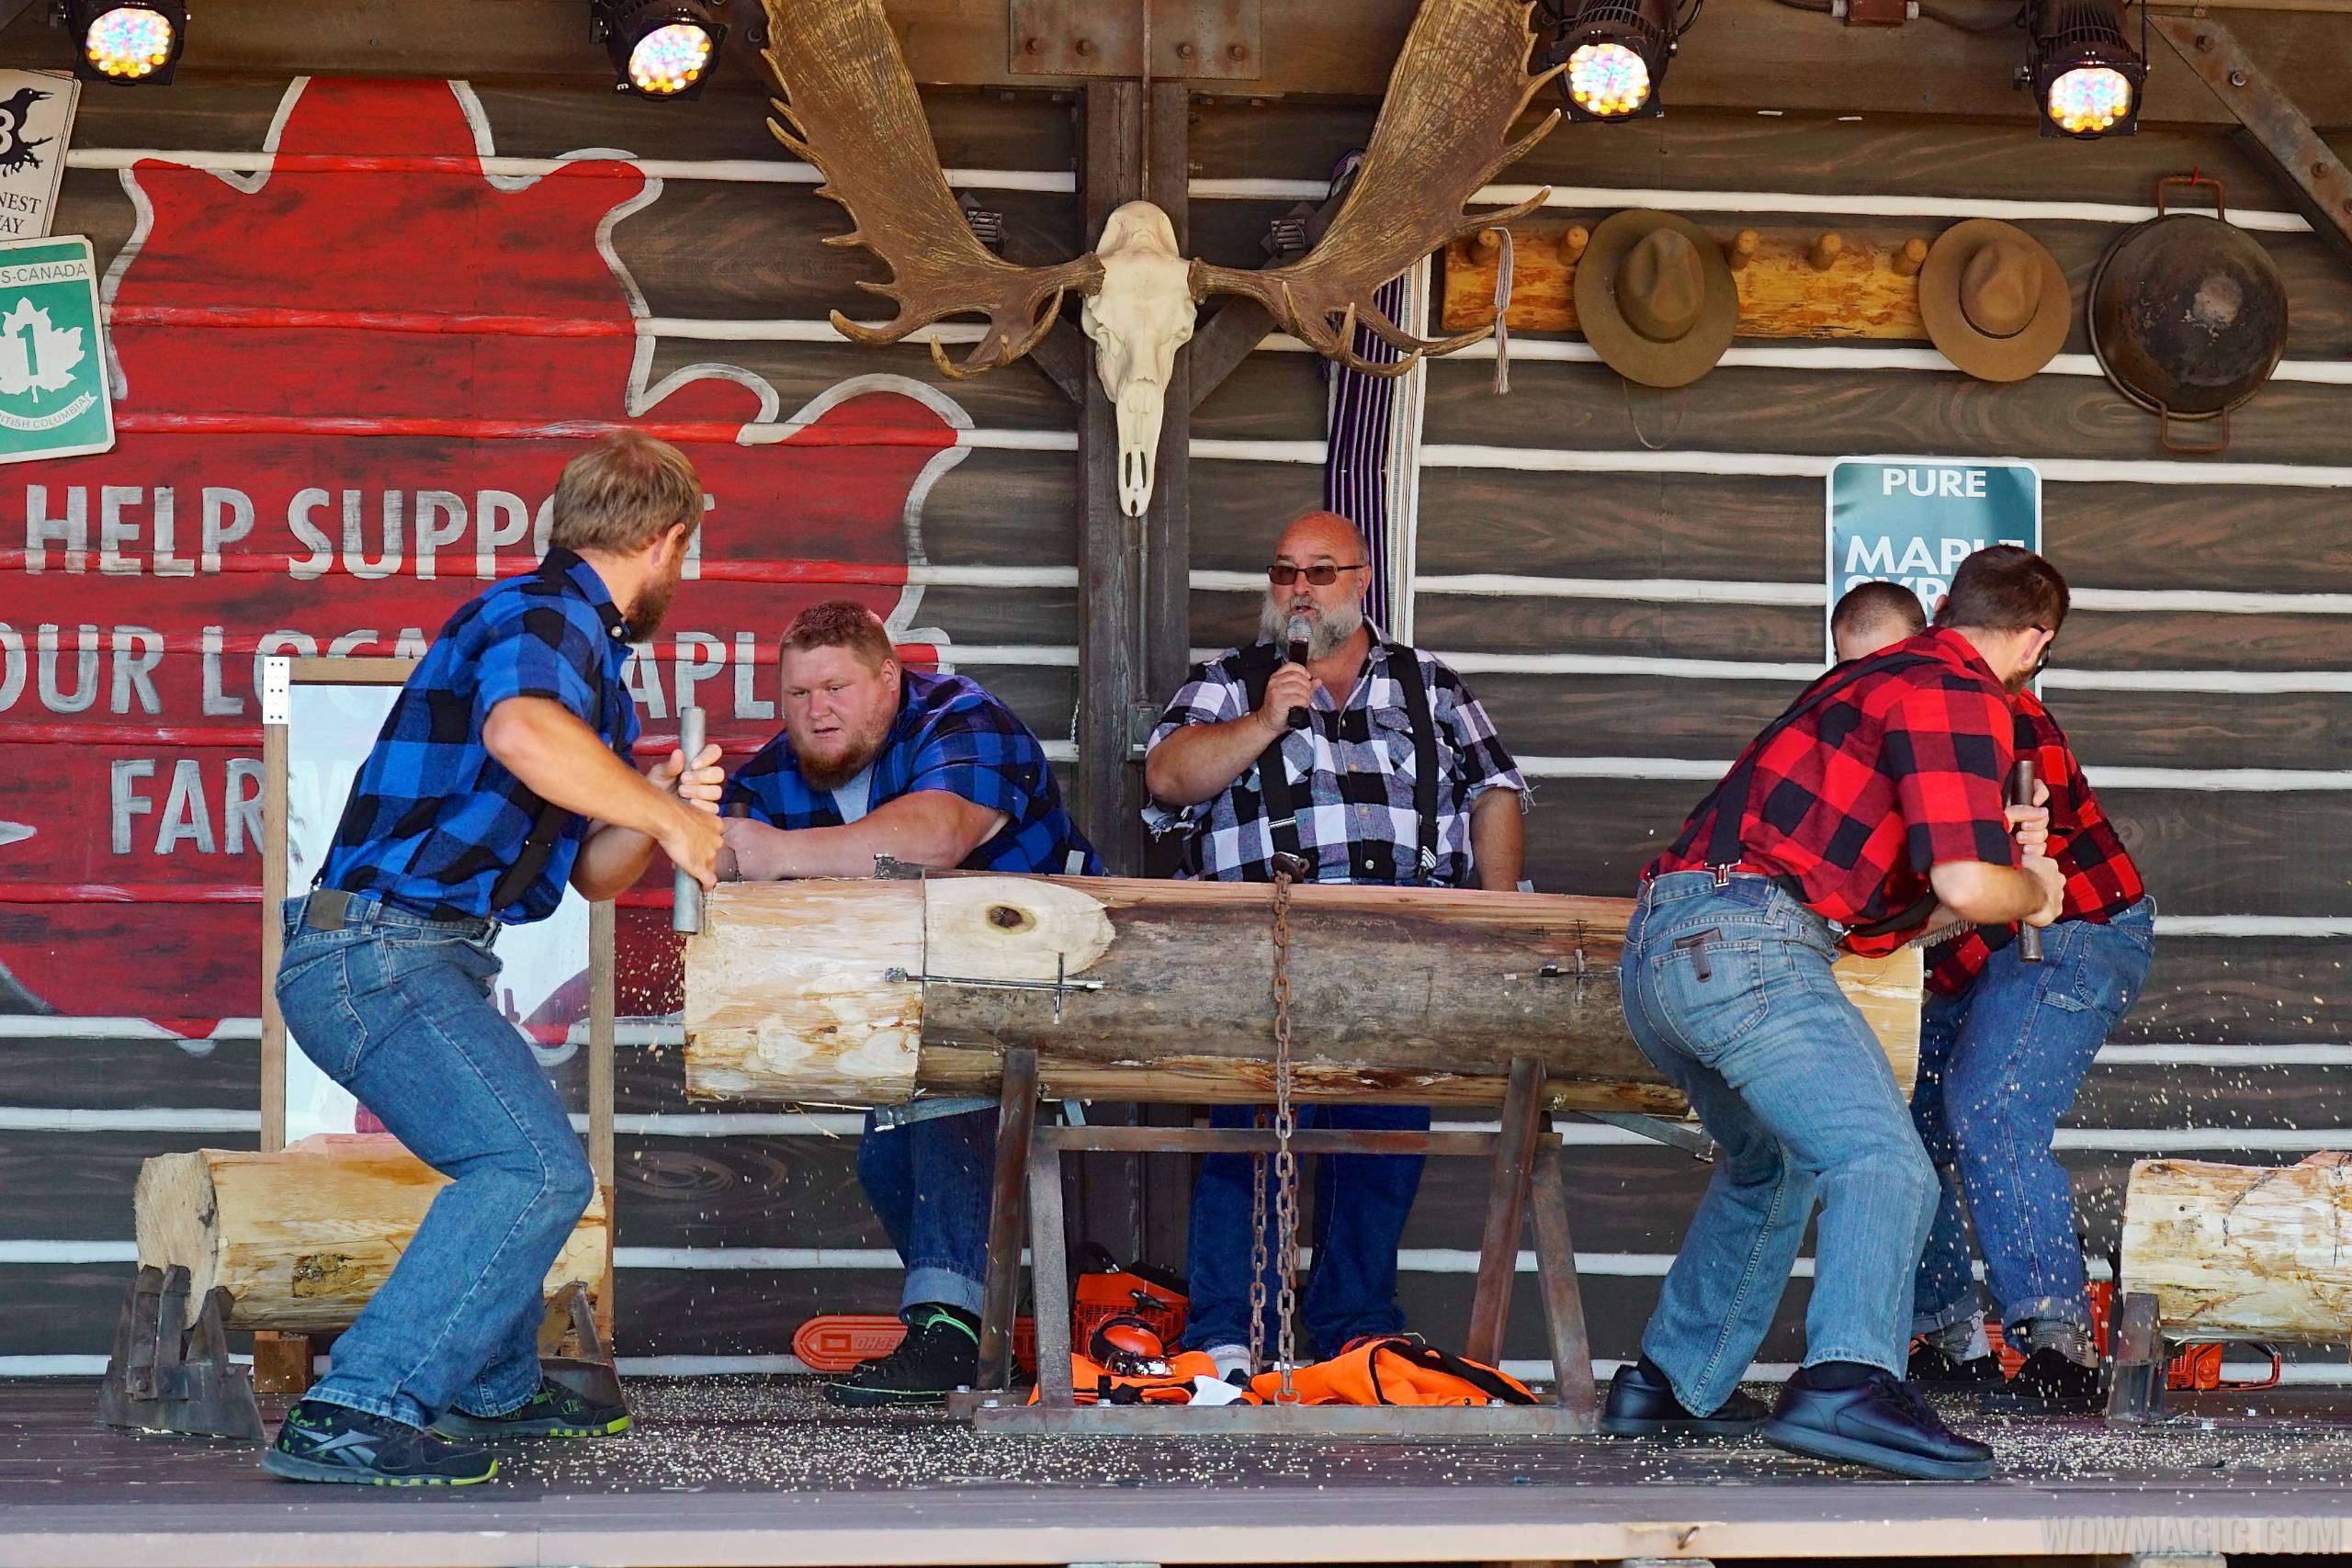 VIDEO - Canadian Lumberjack Show makes its debut performance at Epcot's Canada Pavilion